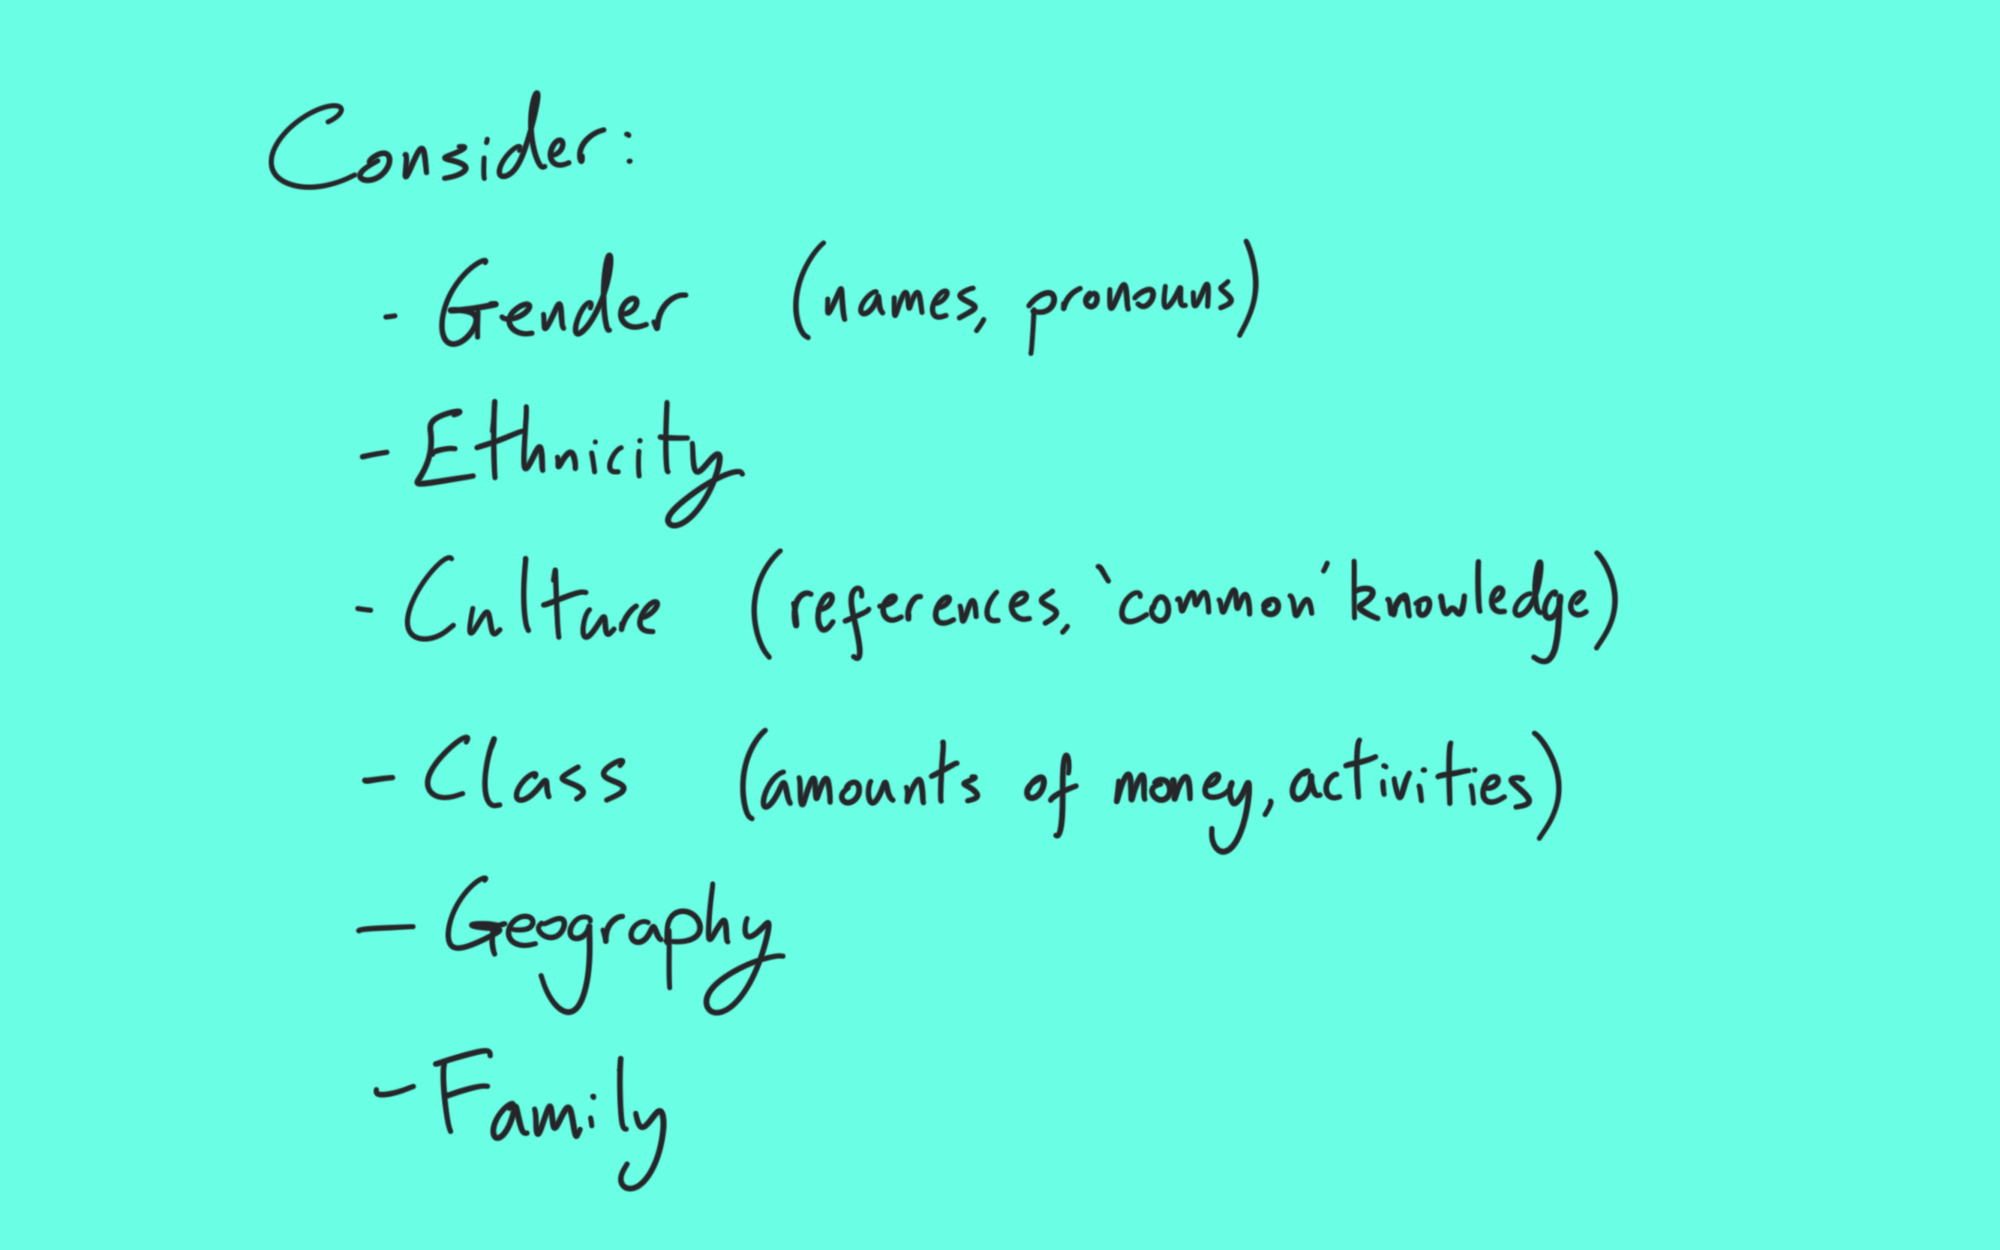 Consider: gender (names, pronouns); ethnicity; culture (references, common knowledge); class (amounts of money, activities); geography; family